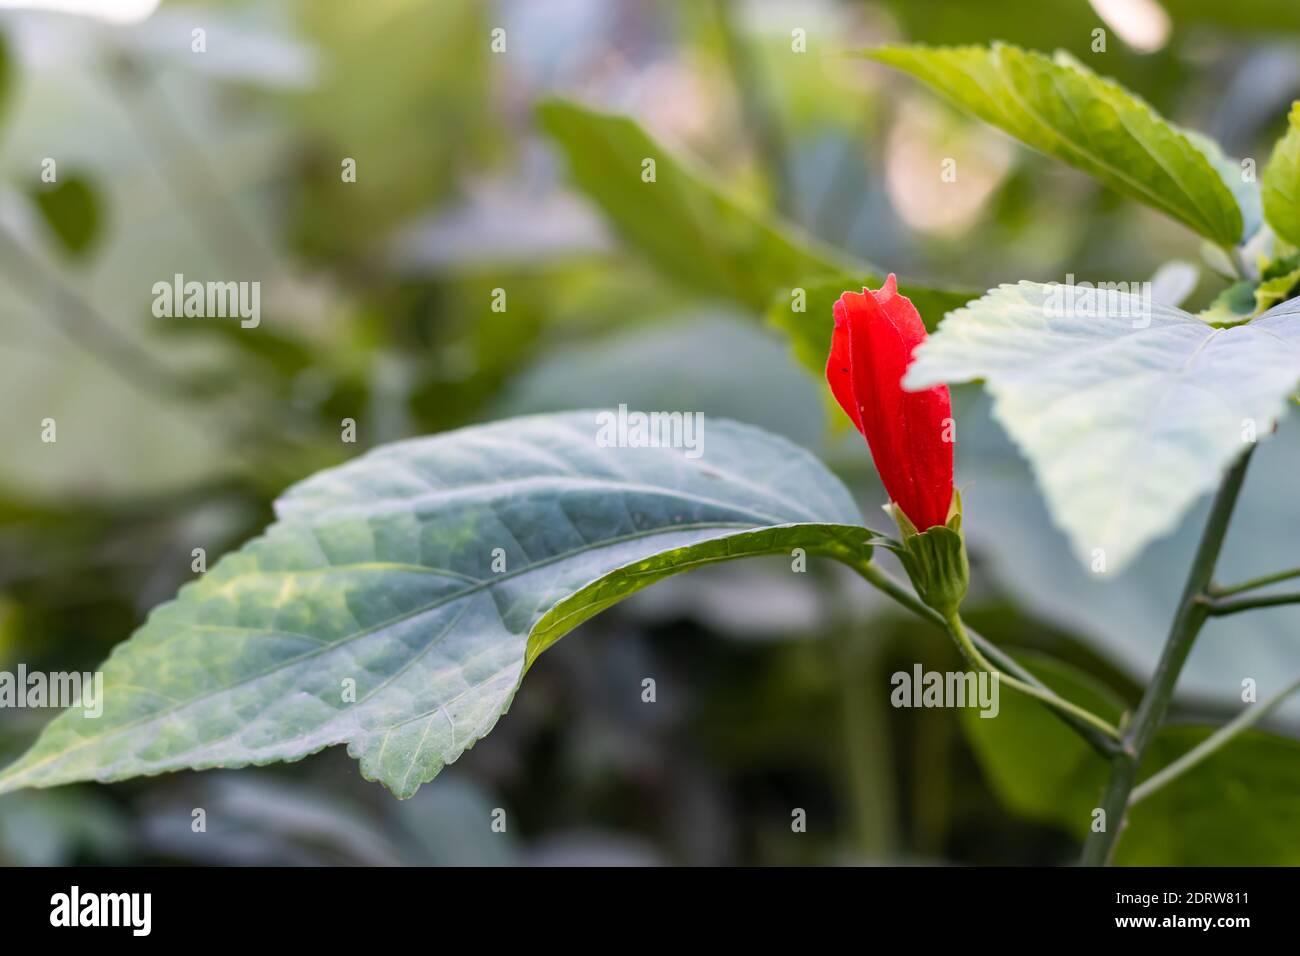 Jaba flower or Red Hibiscus flower buds waiting for blooming in the garden on beautiful green soft background with leaves Stock Photo